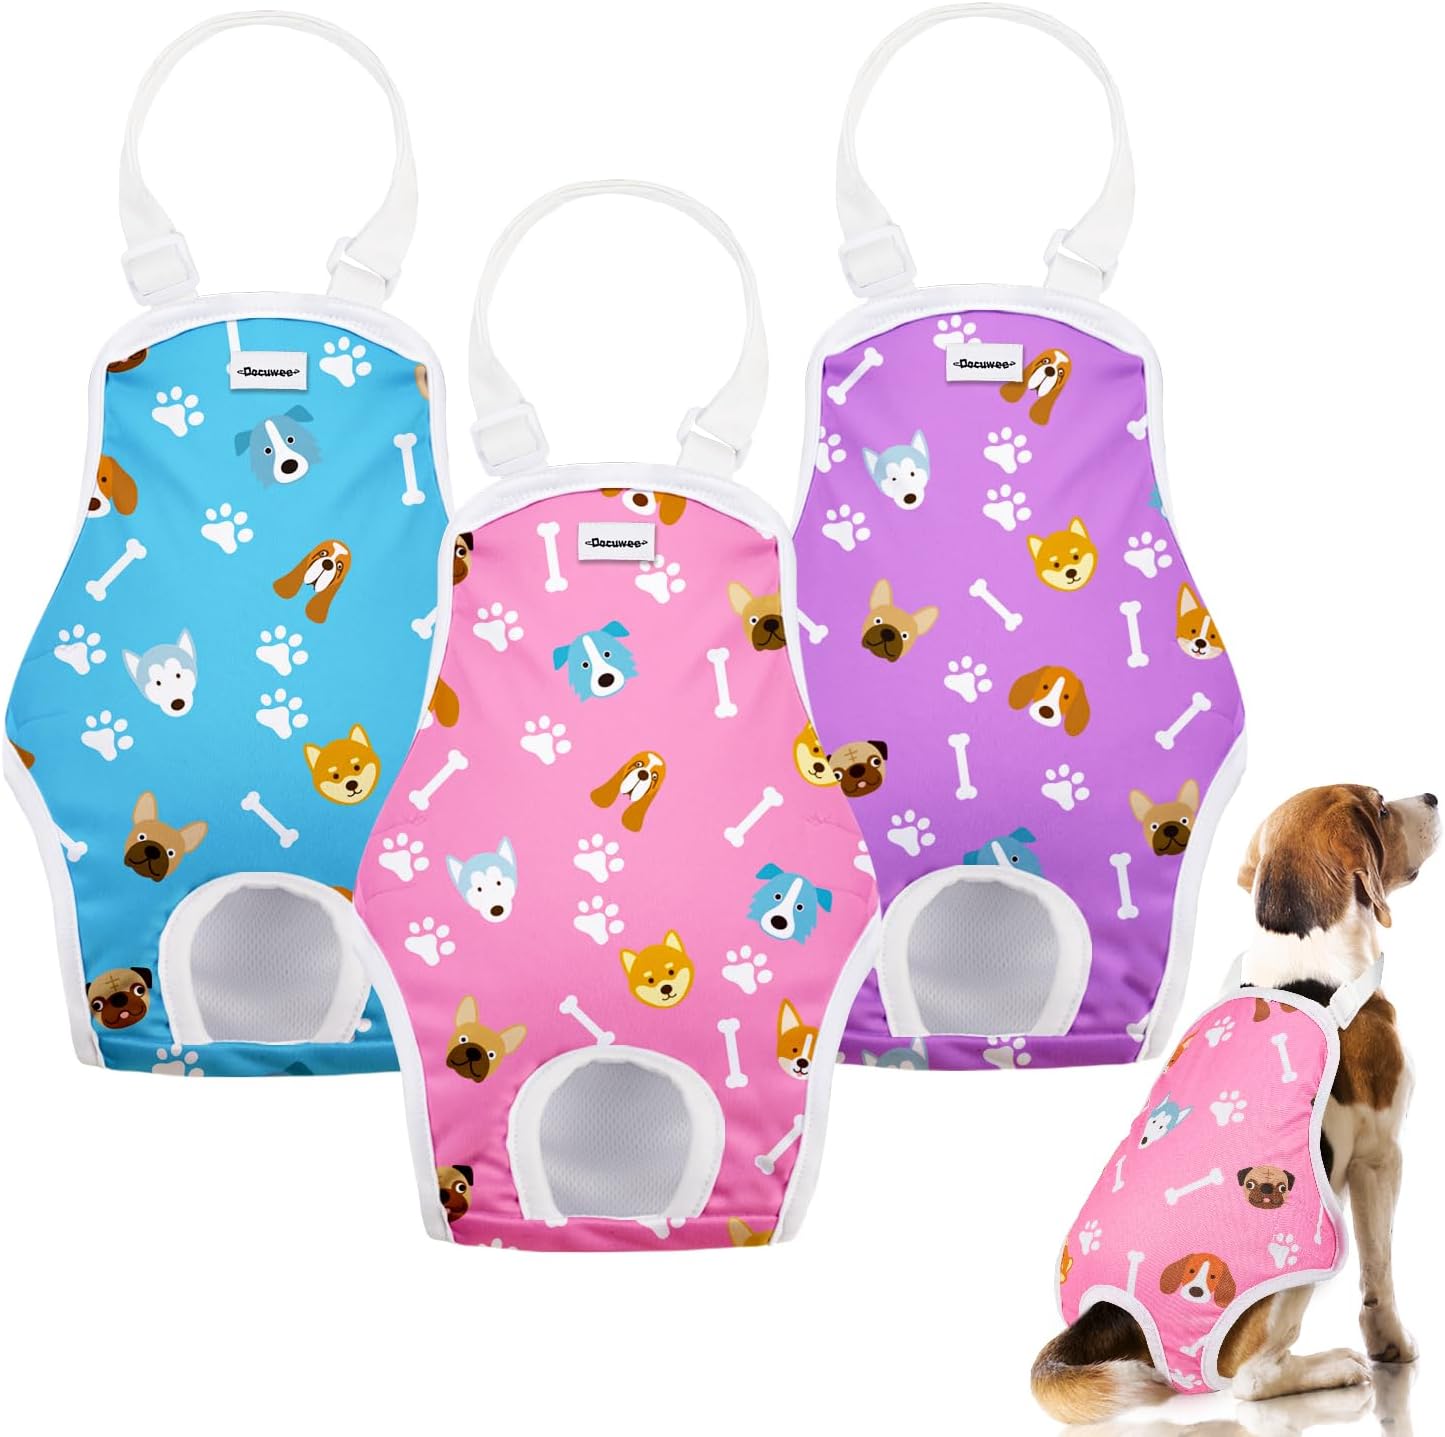 Buy Dog Diaper Sanitary Pantie with Suspender，Pet Physiological Pants  Adjustable Cozy Underwear for Female Girl Dogs，Breathable Cotton Briefs for  Teddy Corgi French Bulldog Puppy Online at Low Prices in India - Amazon.in